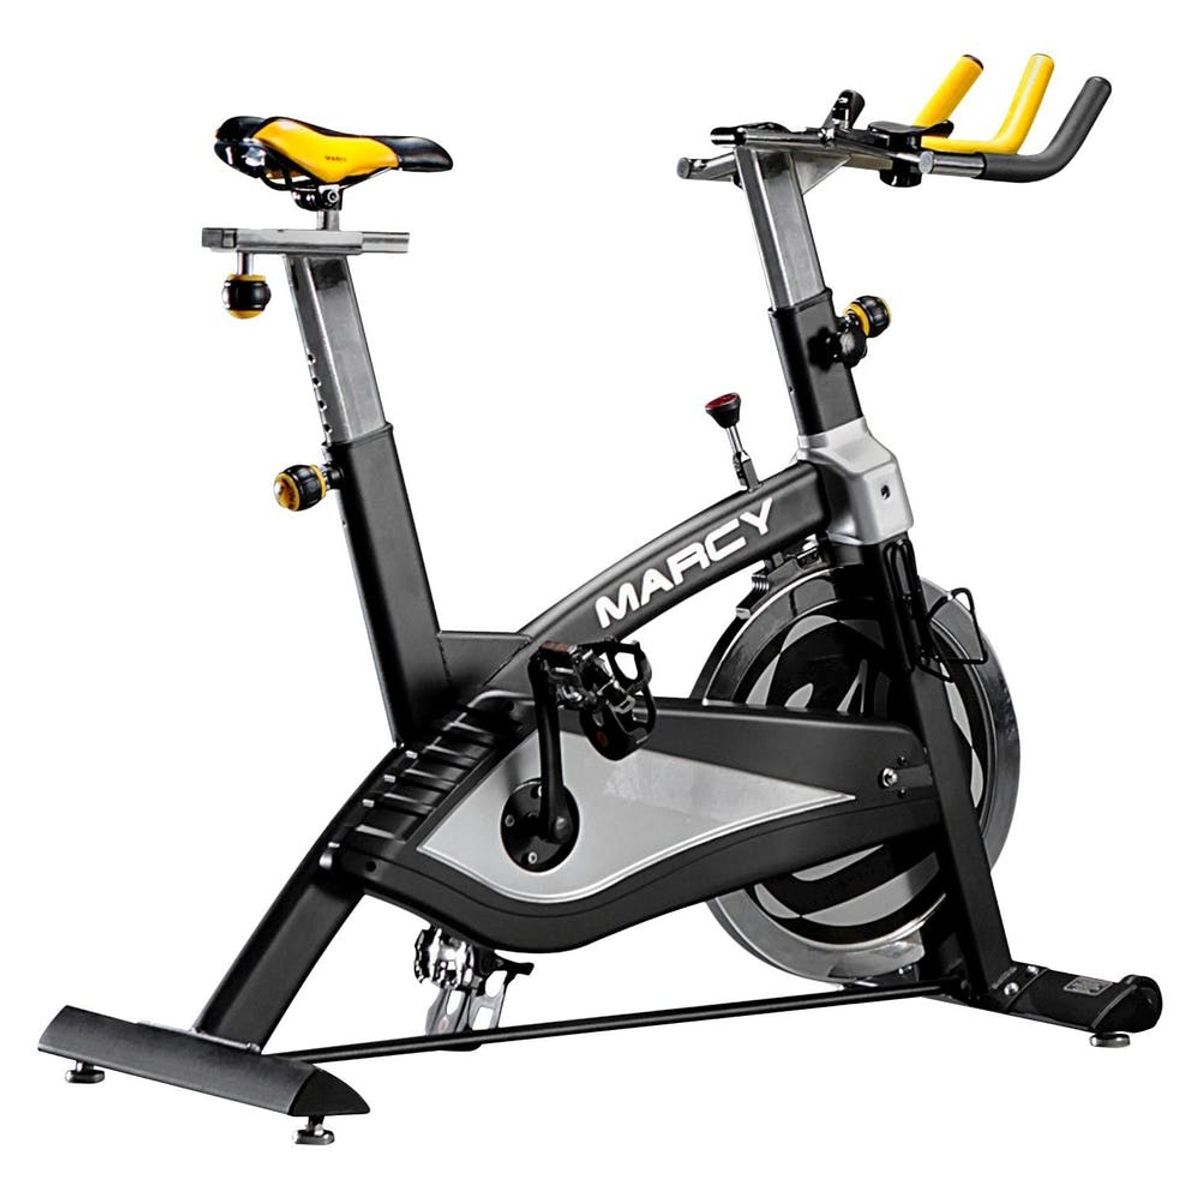 10 Home Gym Essentials for the SoulCycle Enthusiast